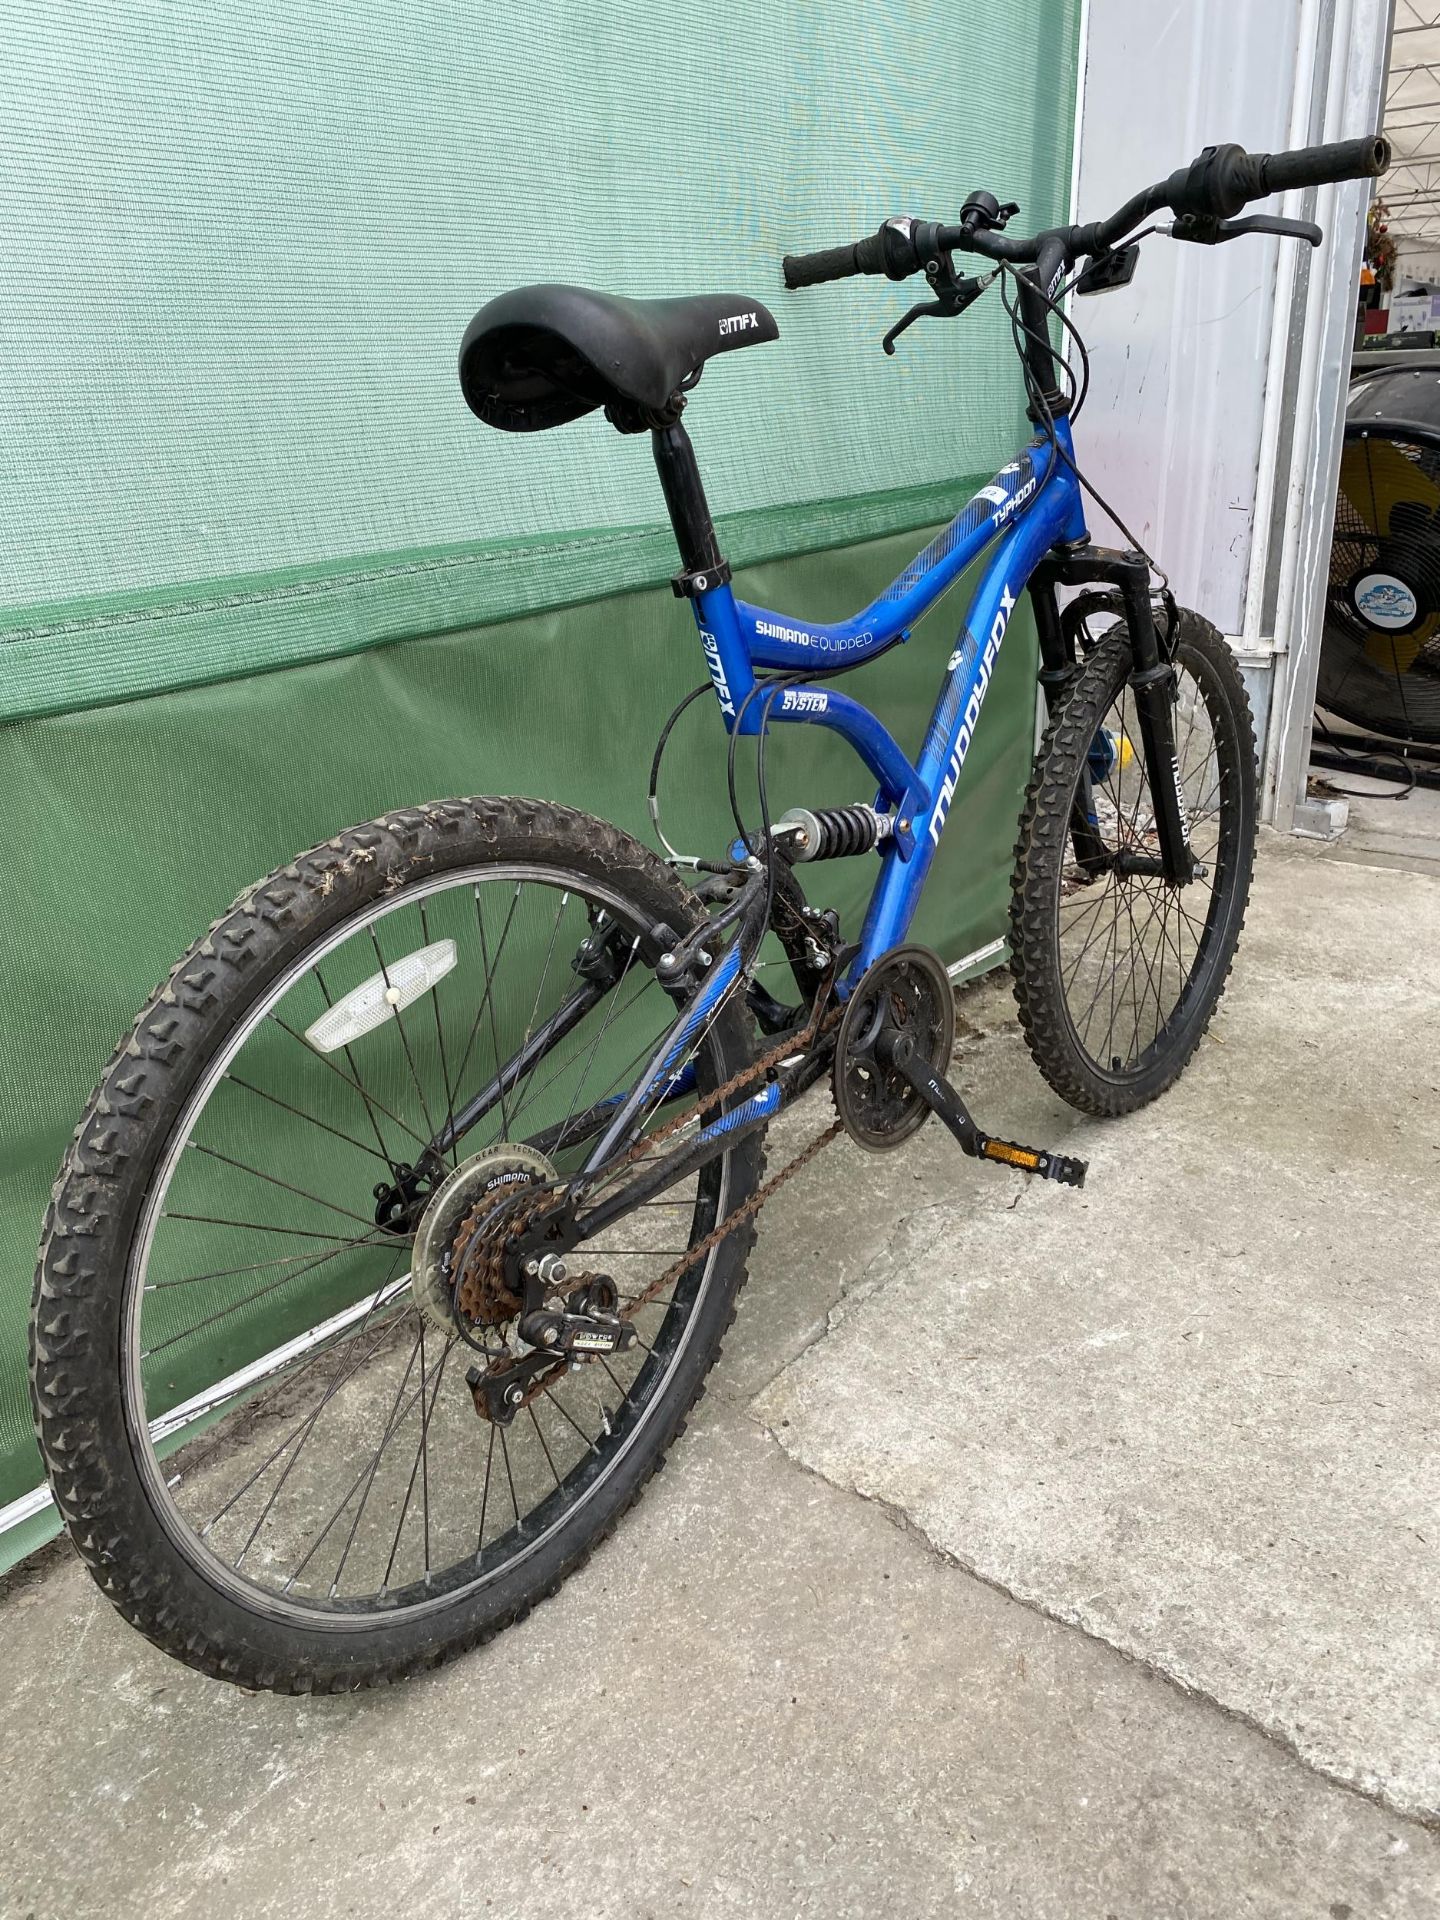 A MUDDYFOX TYPHOON BIKE WITH FRONT AND REAR SUSPENSION AND AN 18 SPEED SHIMANO GEAR SYSTEM - Image 2 of 3